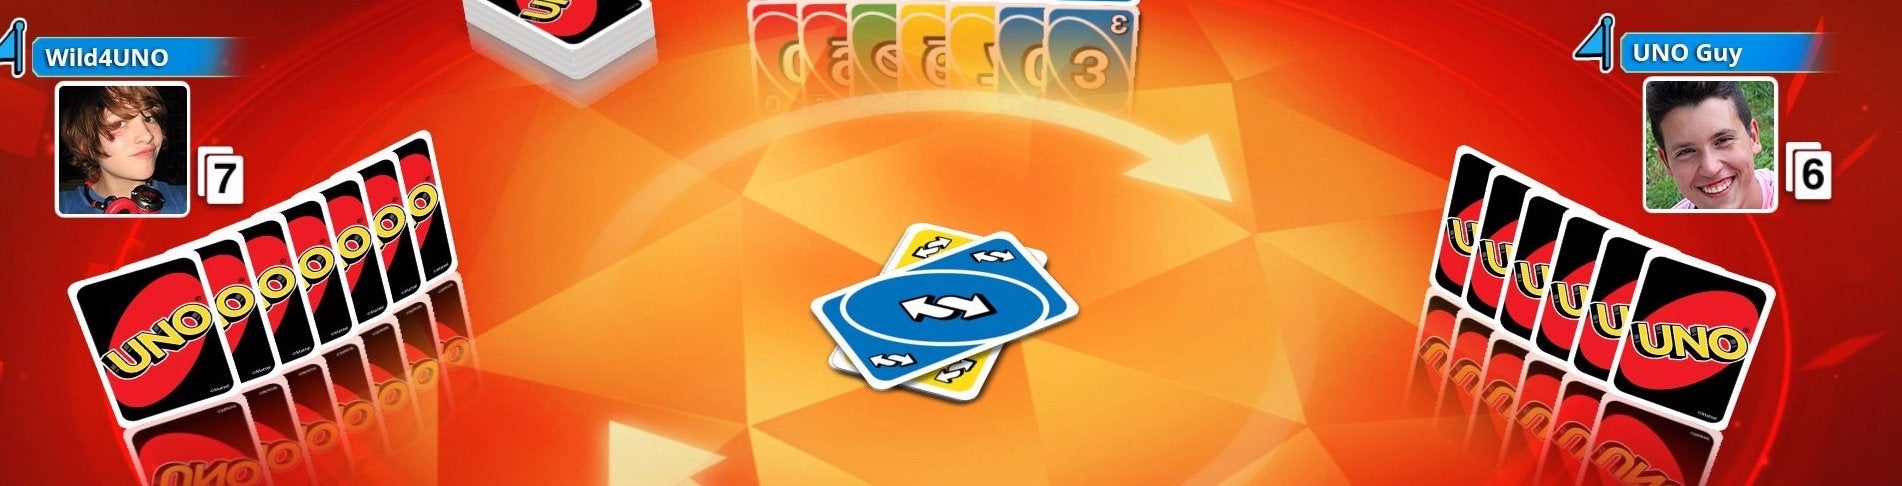 Image for Watch: Ian and Johnny play Uno live at 3:30pm